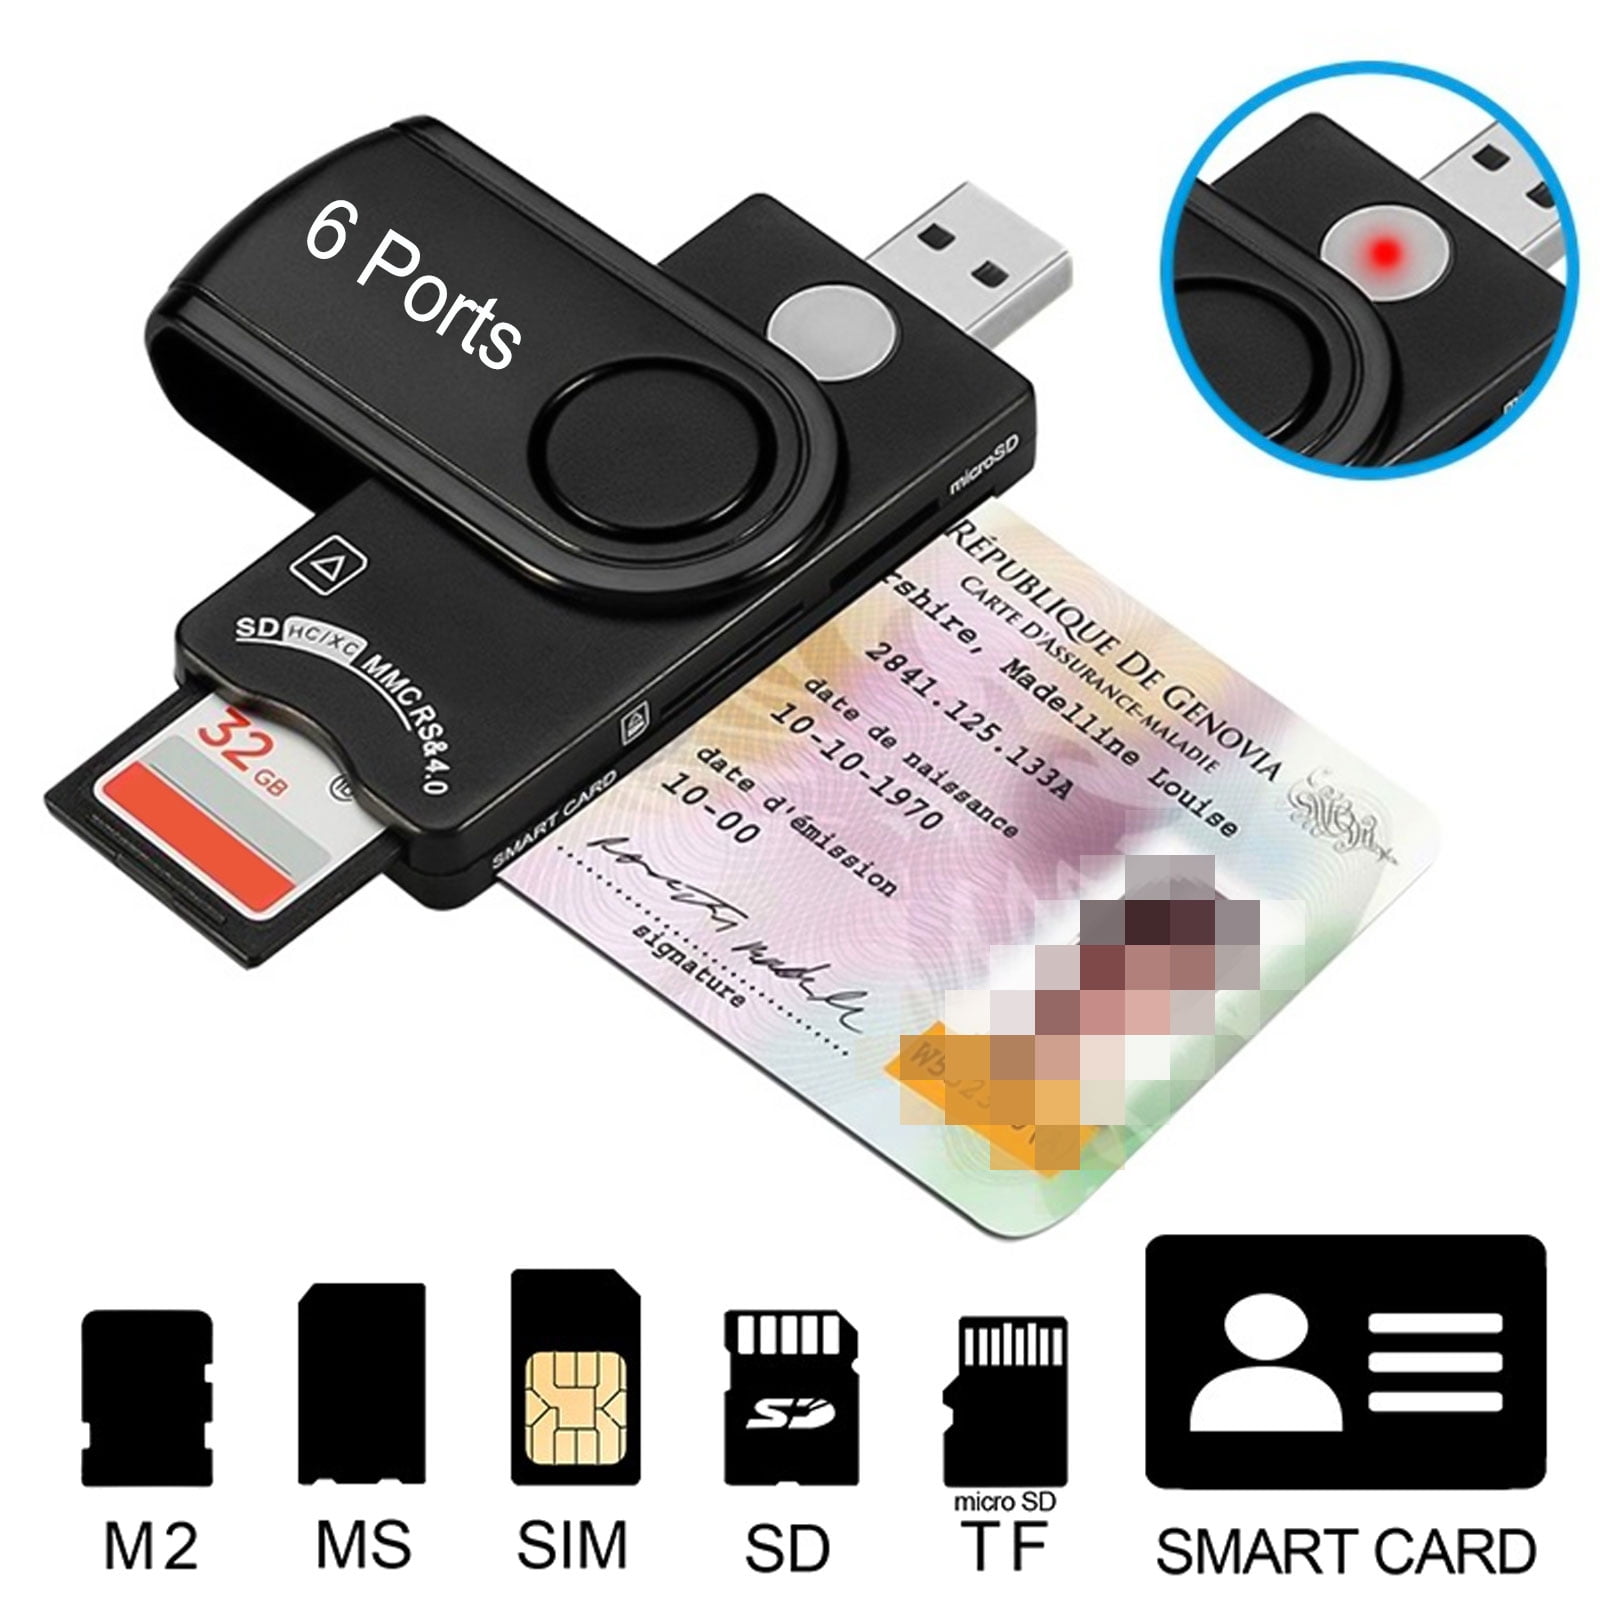 Smart Card Reader Usb 4 Ports Usb Hub, Usb Common Access Cac Card, Sdhc /  Sdxc / Sd And Micro Sd Card Reader For Sim And Mmc Rs & 4.0 Applicable  Syste